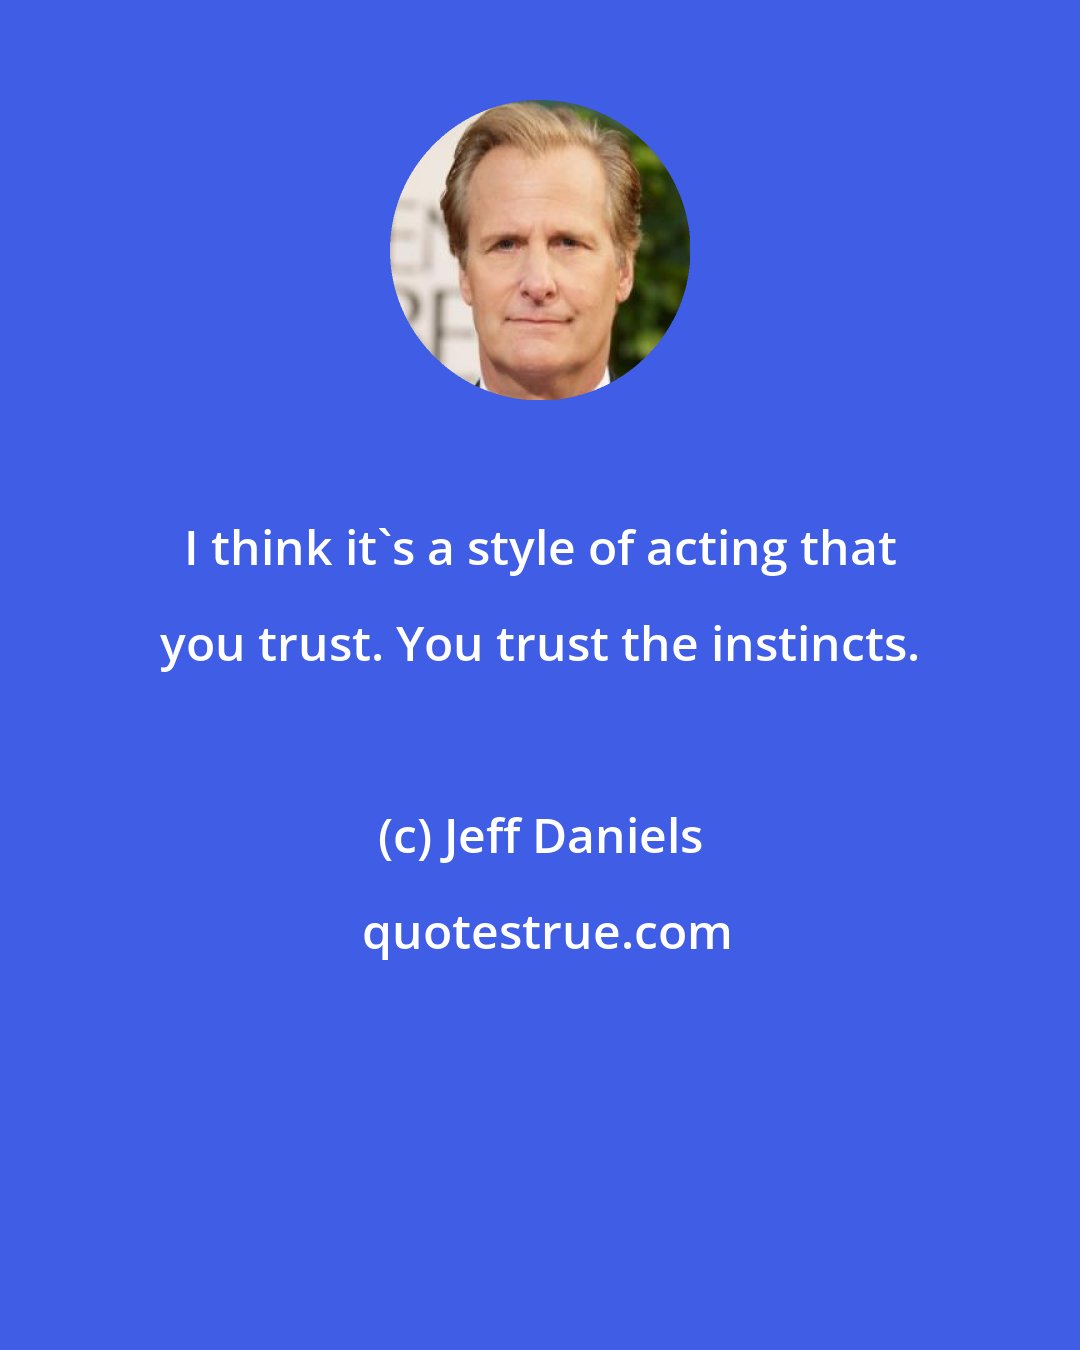 Jeff Daniels: I think it's a style of acting that you trust. You trust the instincts.